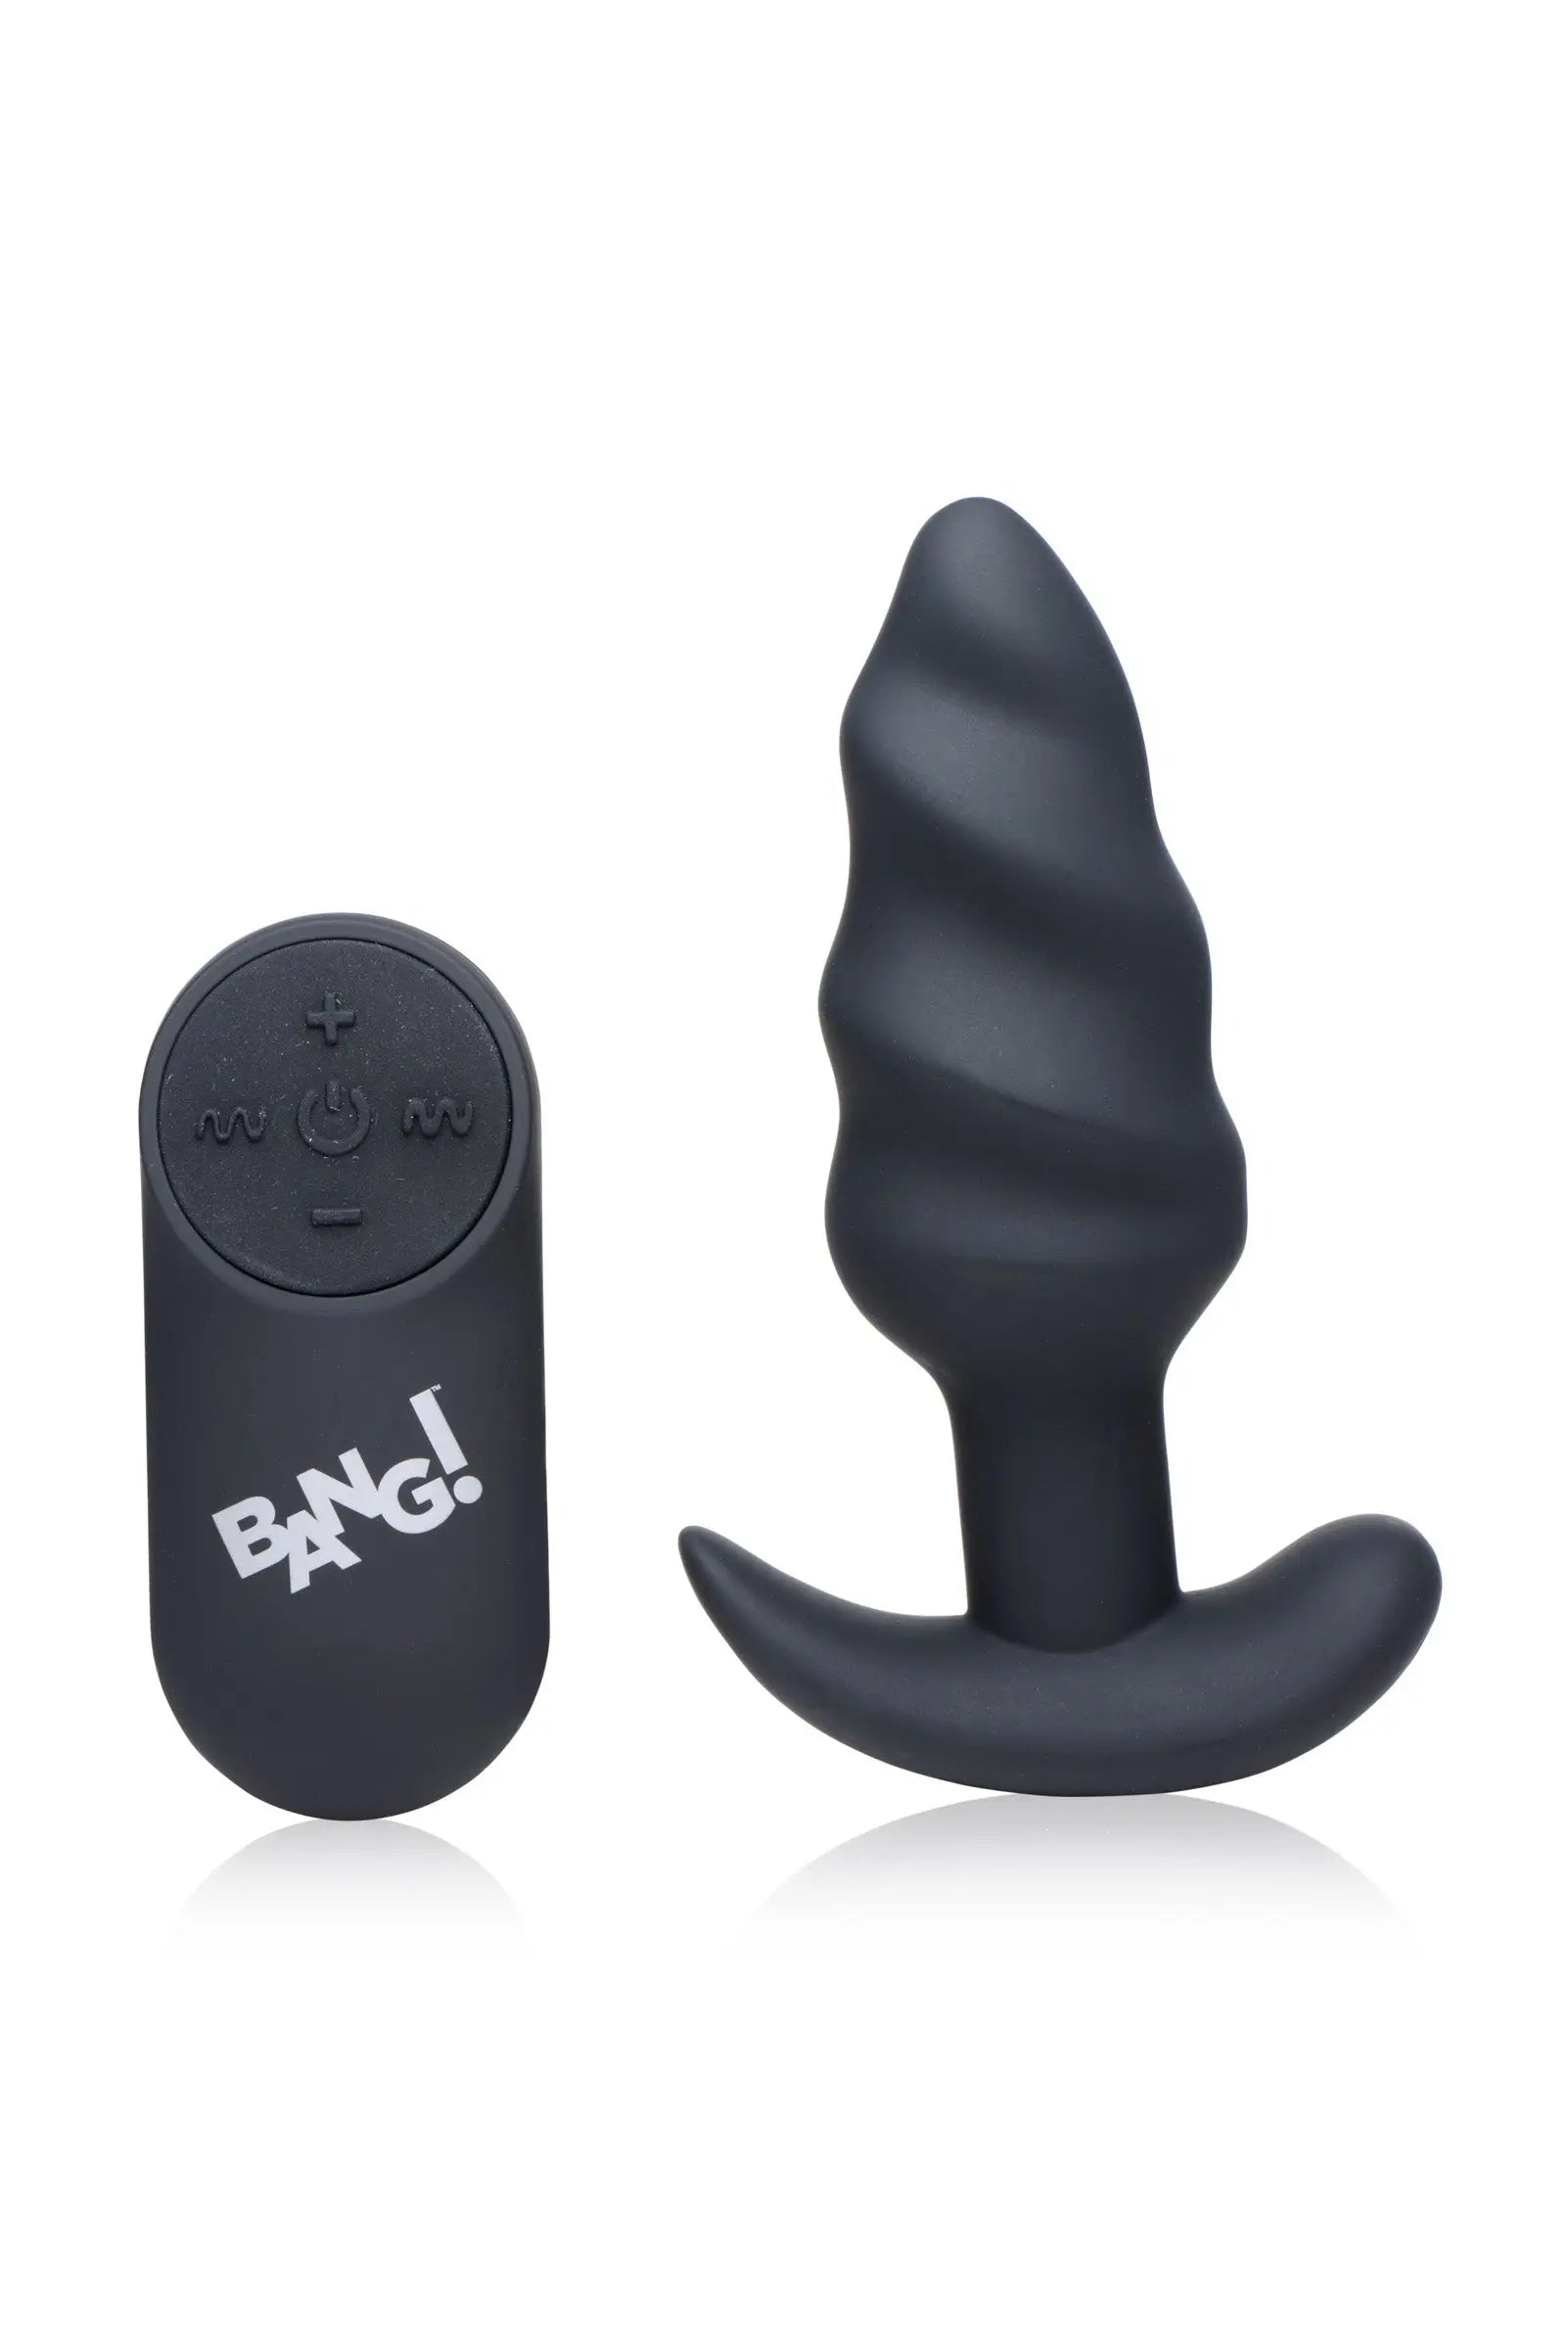 21x Silicone Swirl Plug With Remote XR Brands Bang